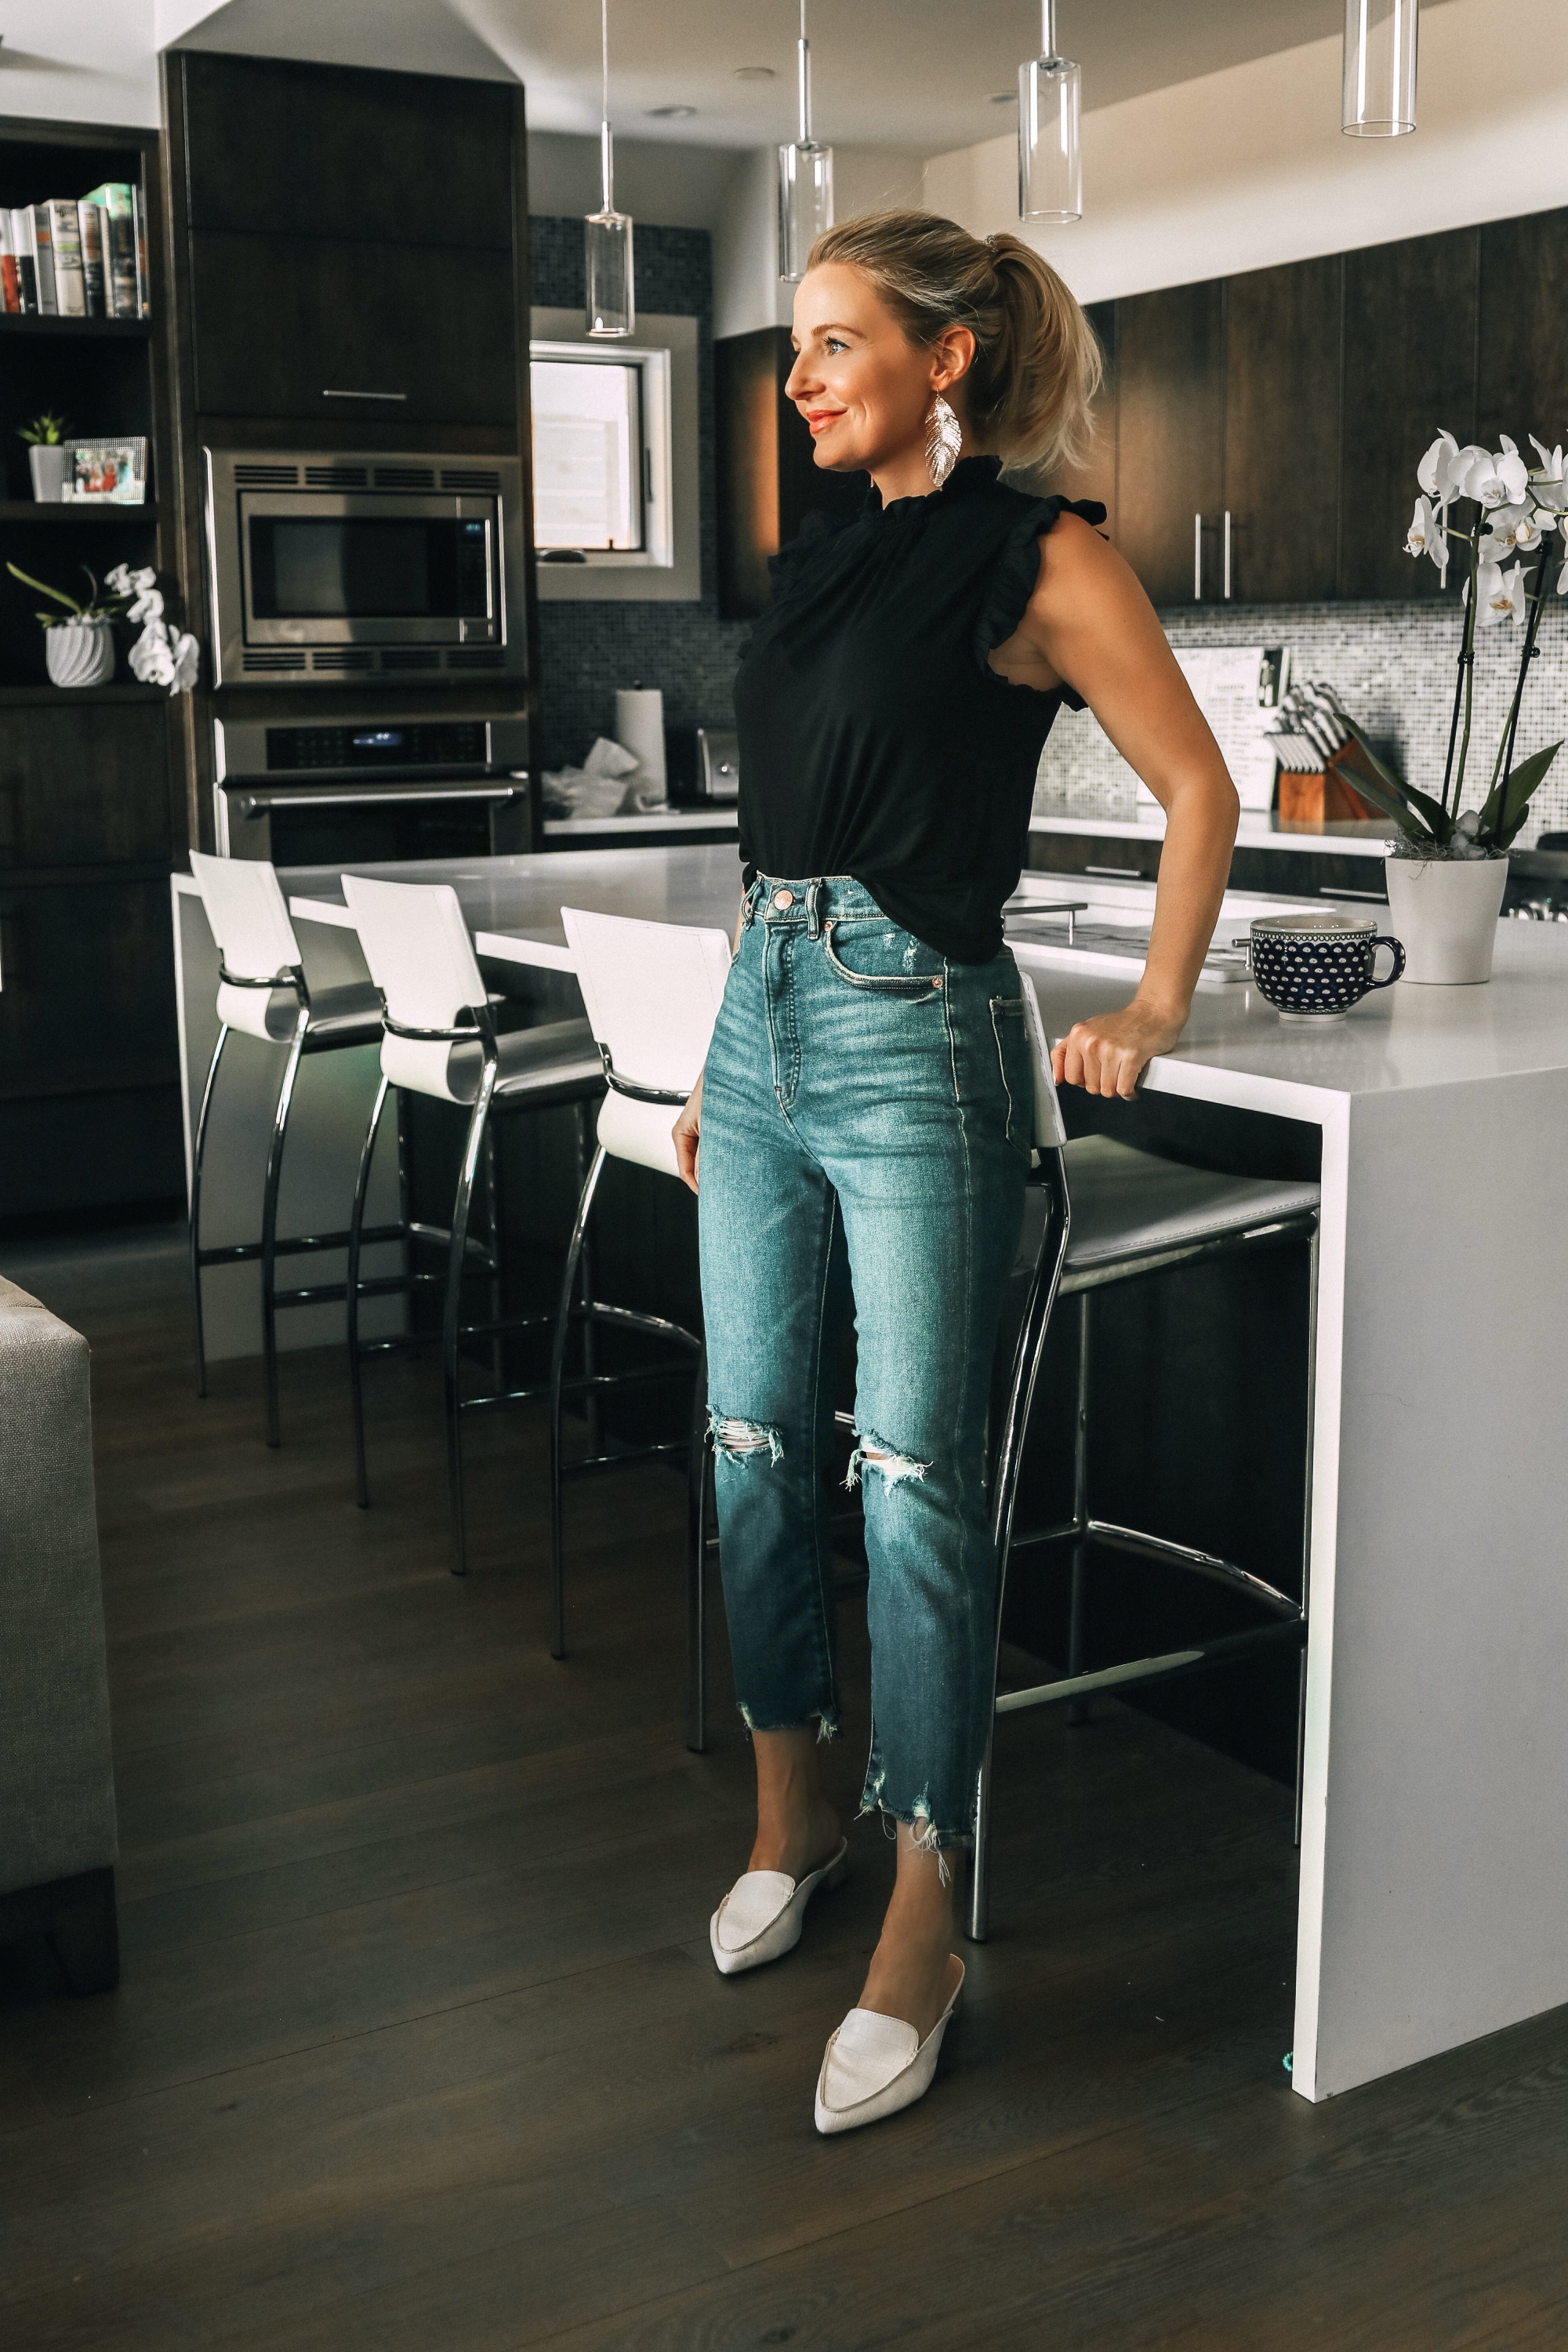 Work from home outfits that are affordable from Express featuring high rise distressed mom jeans, white loafers, black mock neck ruffle cotton top and lightweight leaf earrings